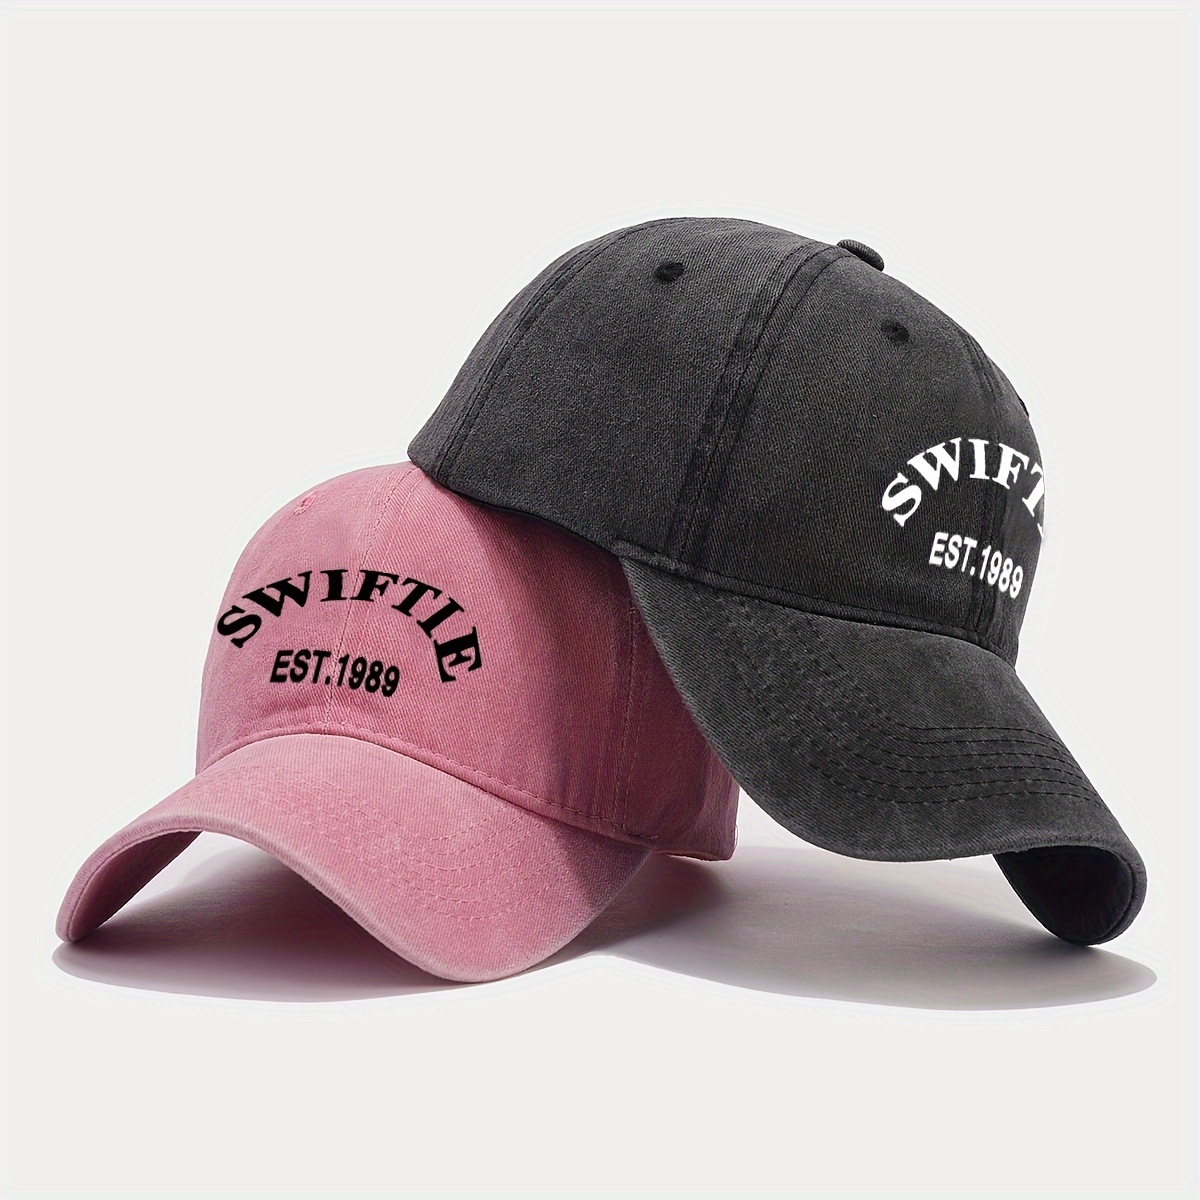 

Swiftie Est.1989 Baseball Cap: Soft Cotton, Adjustable, Anime-inspired, Sun Protection, Perfect For Casual Outings